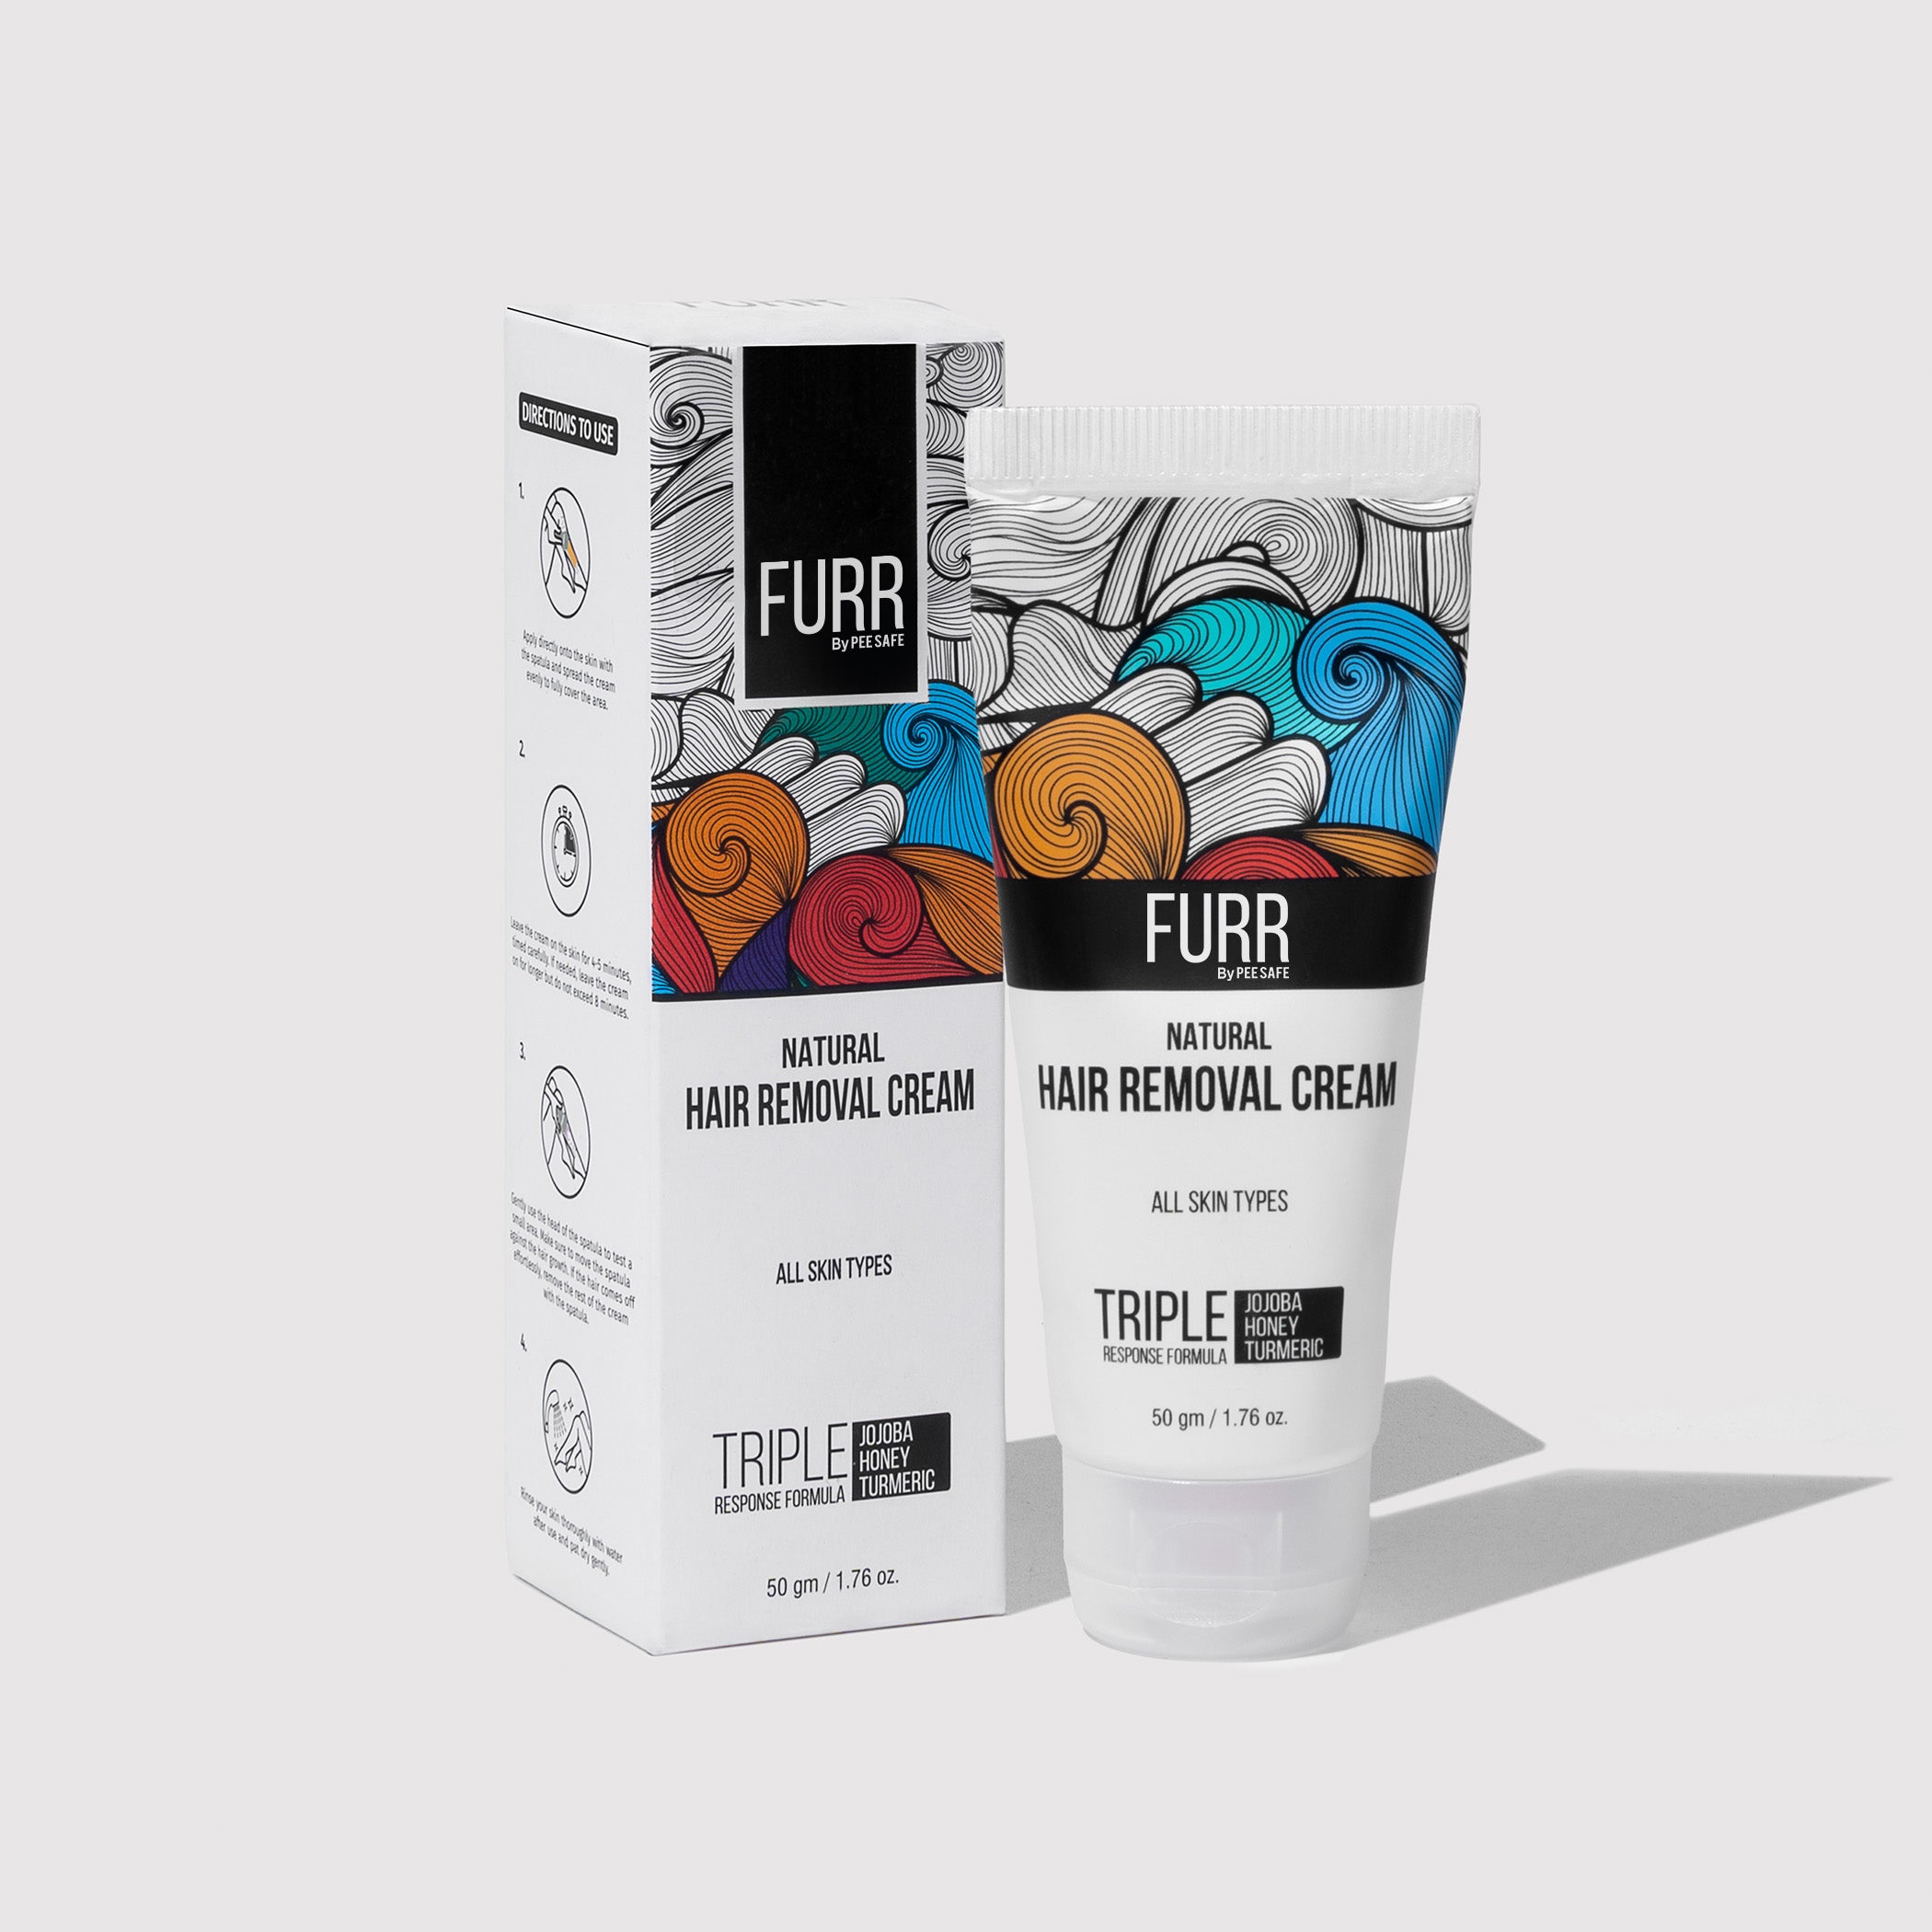 Furr Hair Removal Cream (50 GM - Pack of 2)